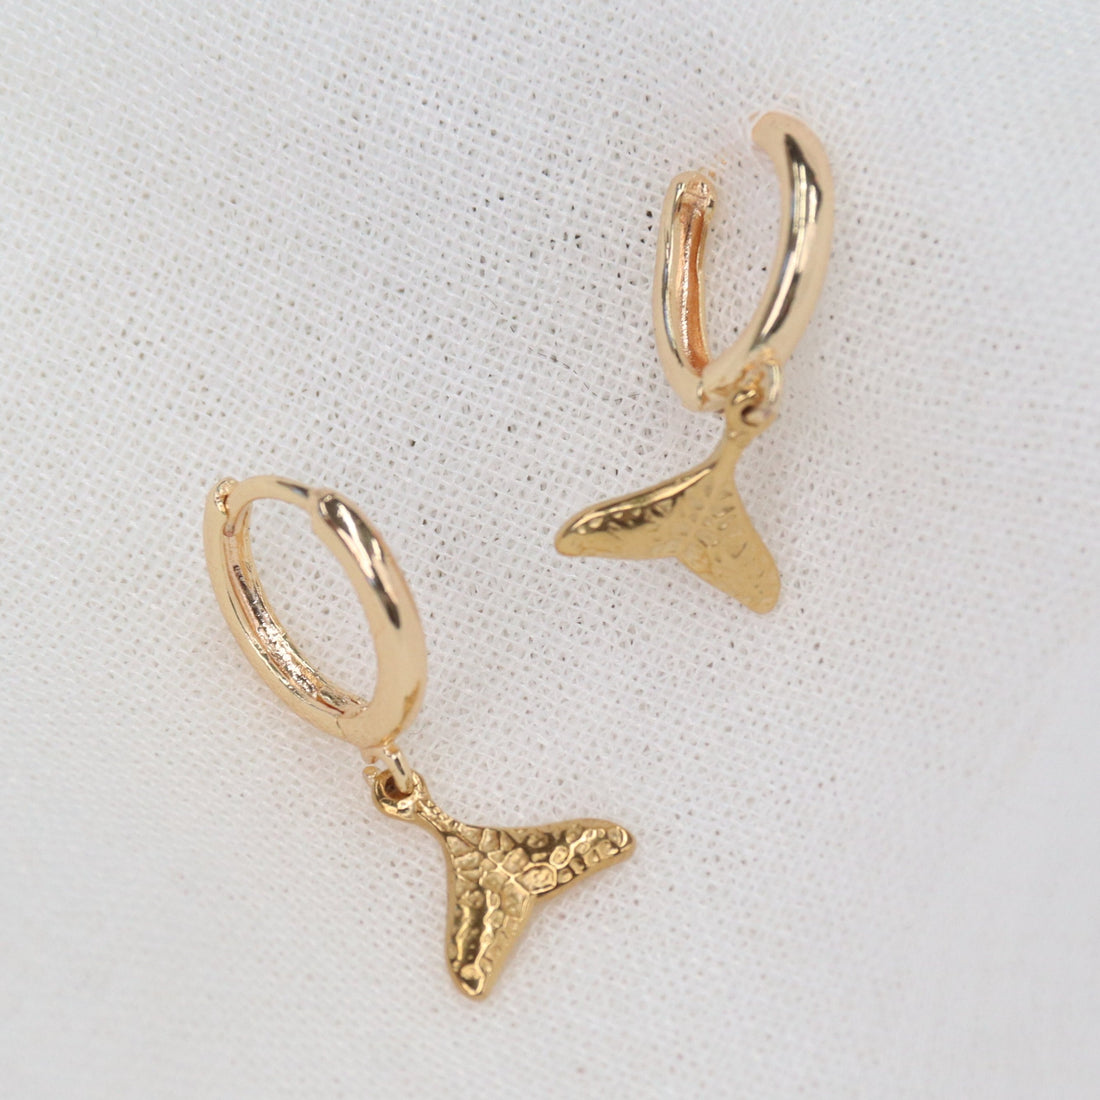 Sipadam | Textured Gold Plating or Stainless Steel Whale Tail Earrings